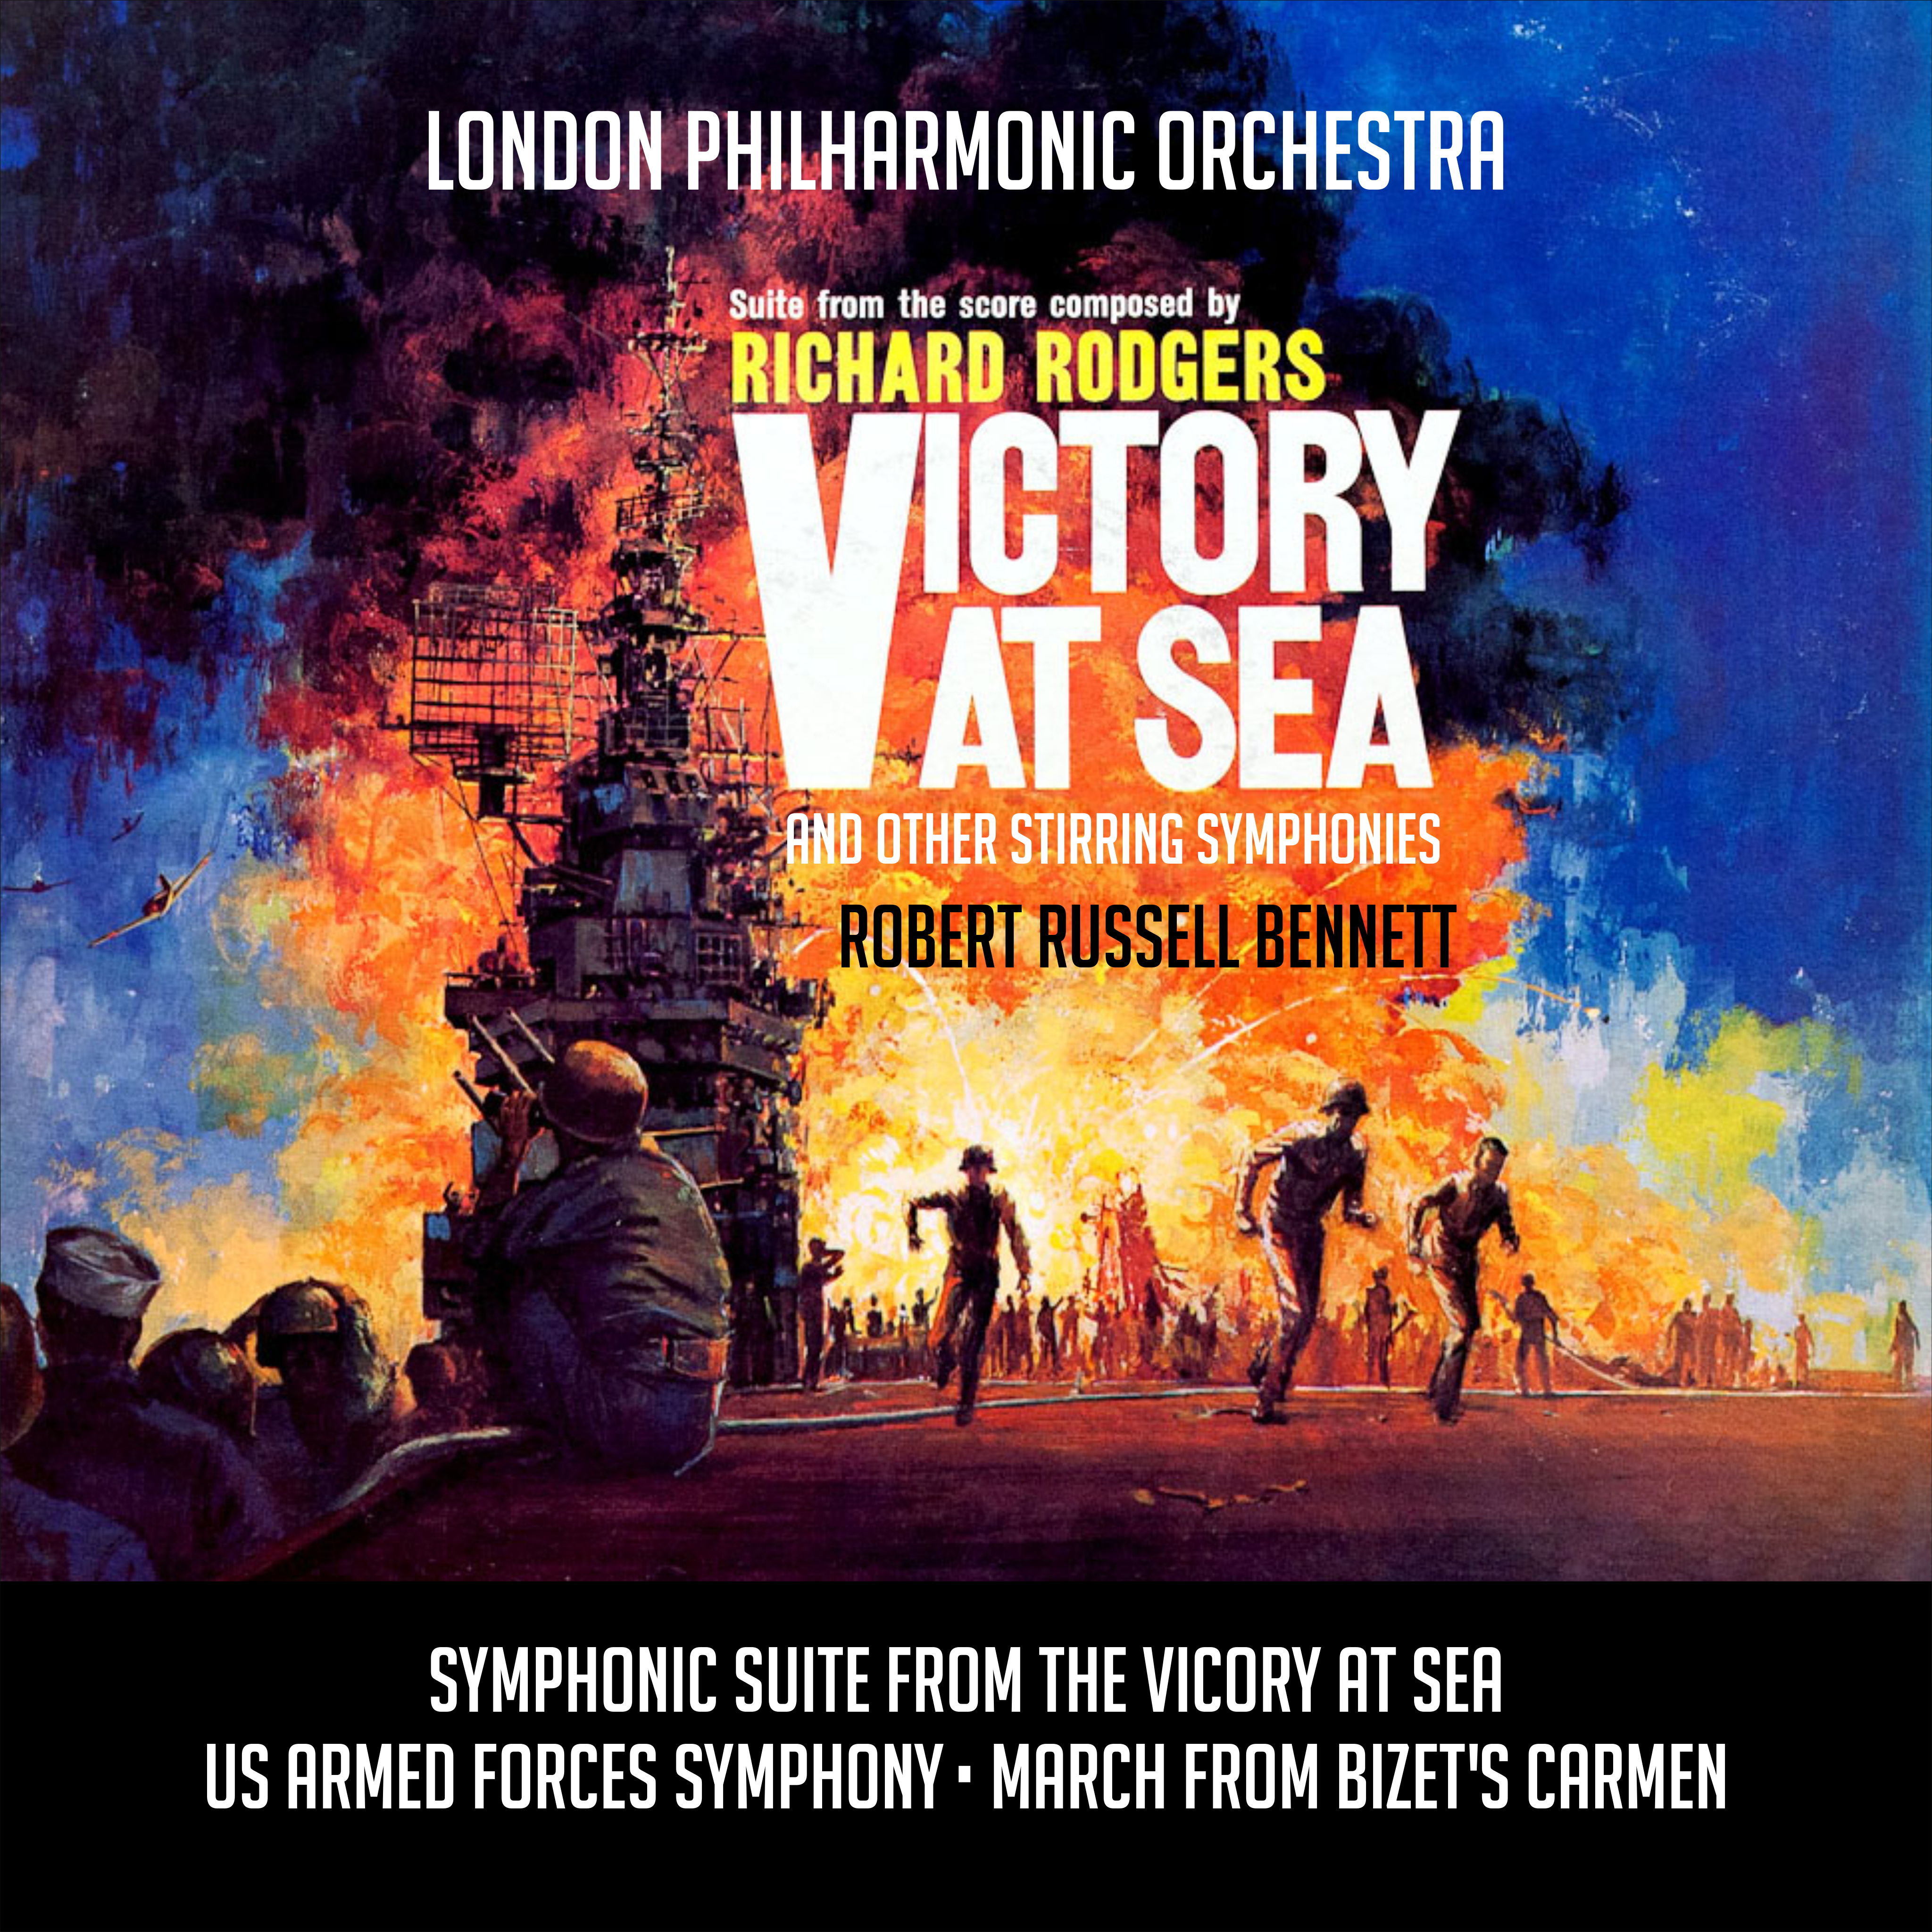 Symphonic Suite from the Vicory at Sea